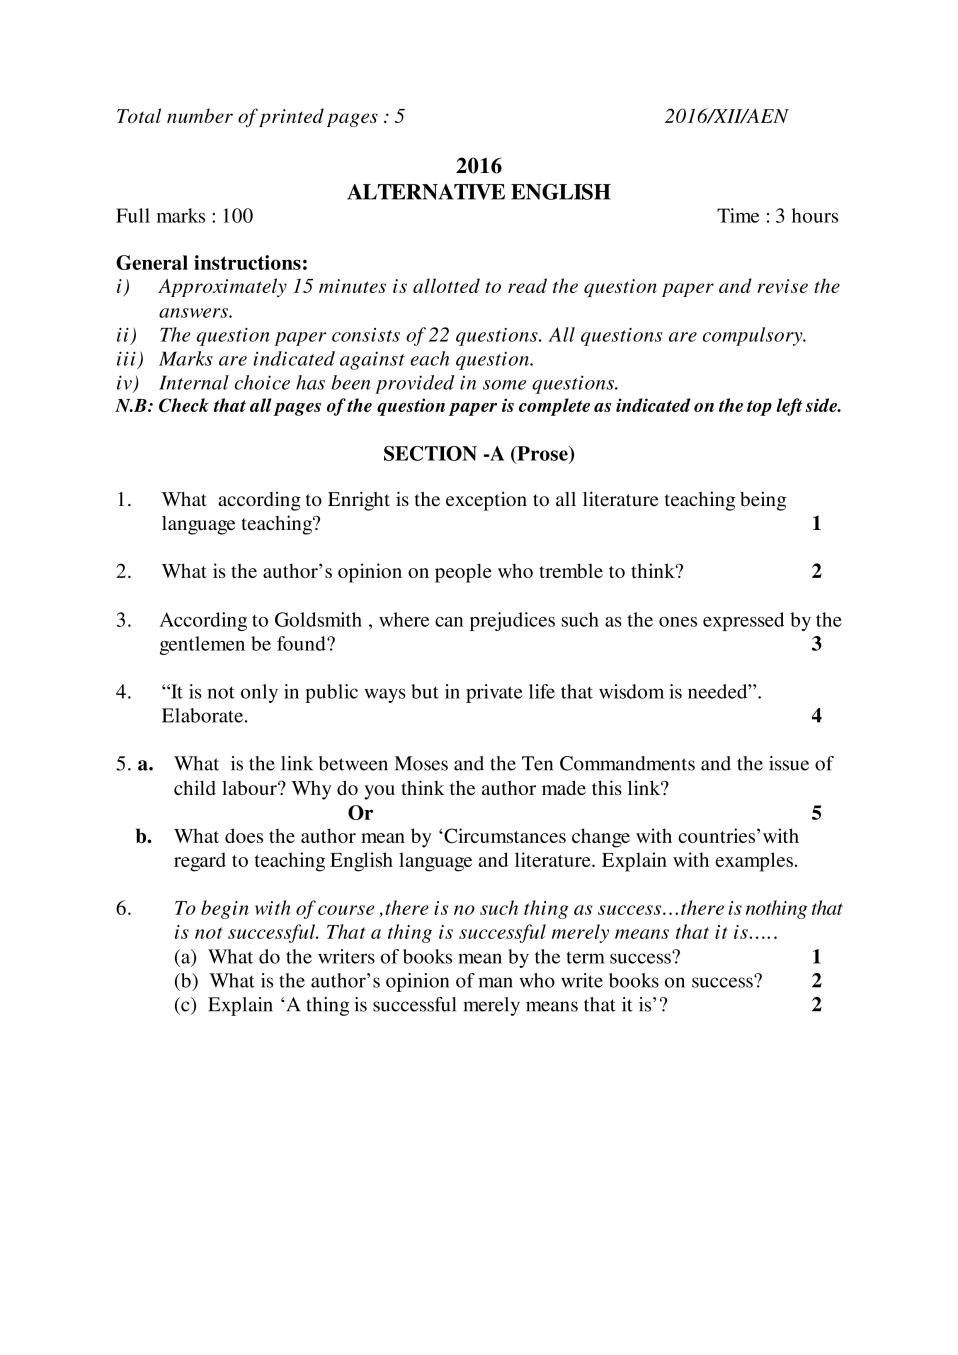 NBSE Class 12 Question Paper 2016 for Alternative English - Page 1